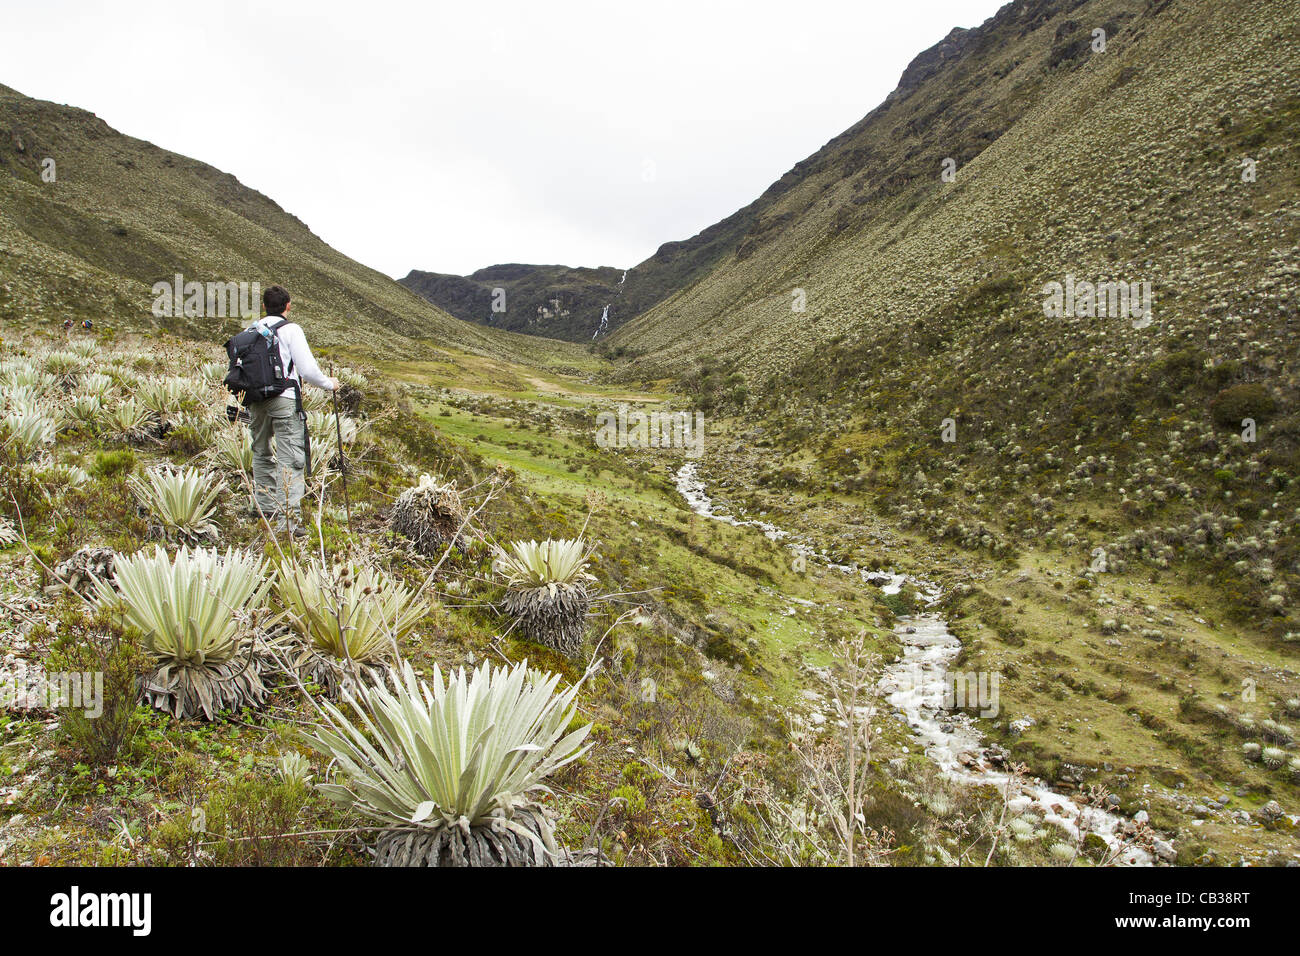 May 12, 2012 - Merida, Merida, Venezuela - Typical landscape of the paramos, an ecossystem found in high altitudes of northwestern South America. Sierra de la Culata National Park comprehend an area of 200.400 ha on the Andean Region of Venezuela and was created in 1989.  Merida, Merida State, Venez Stock Photo